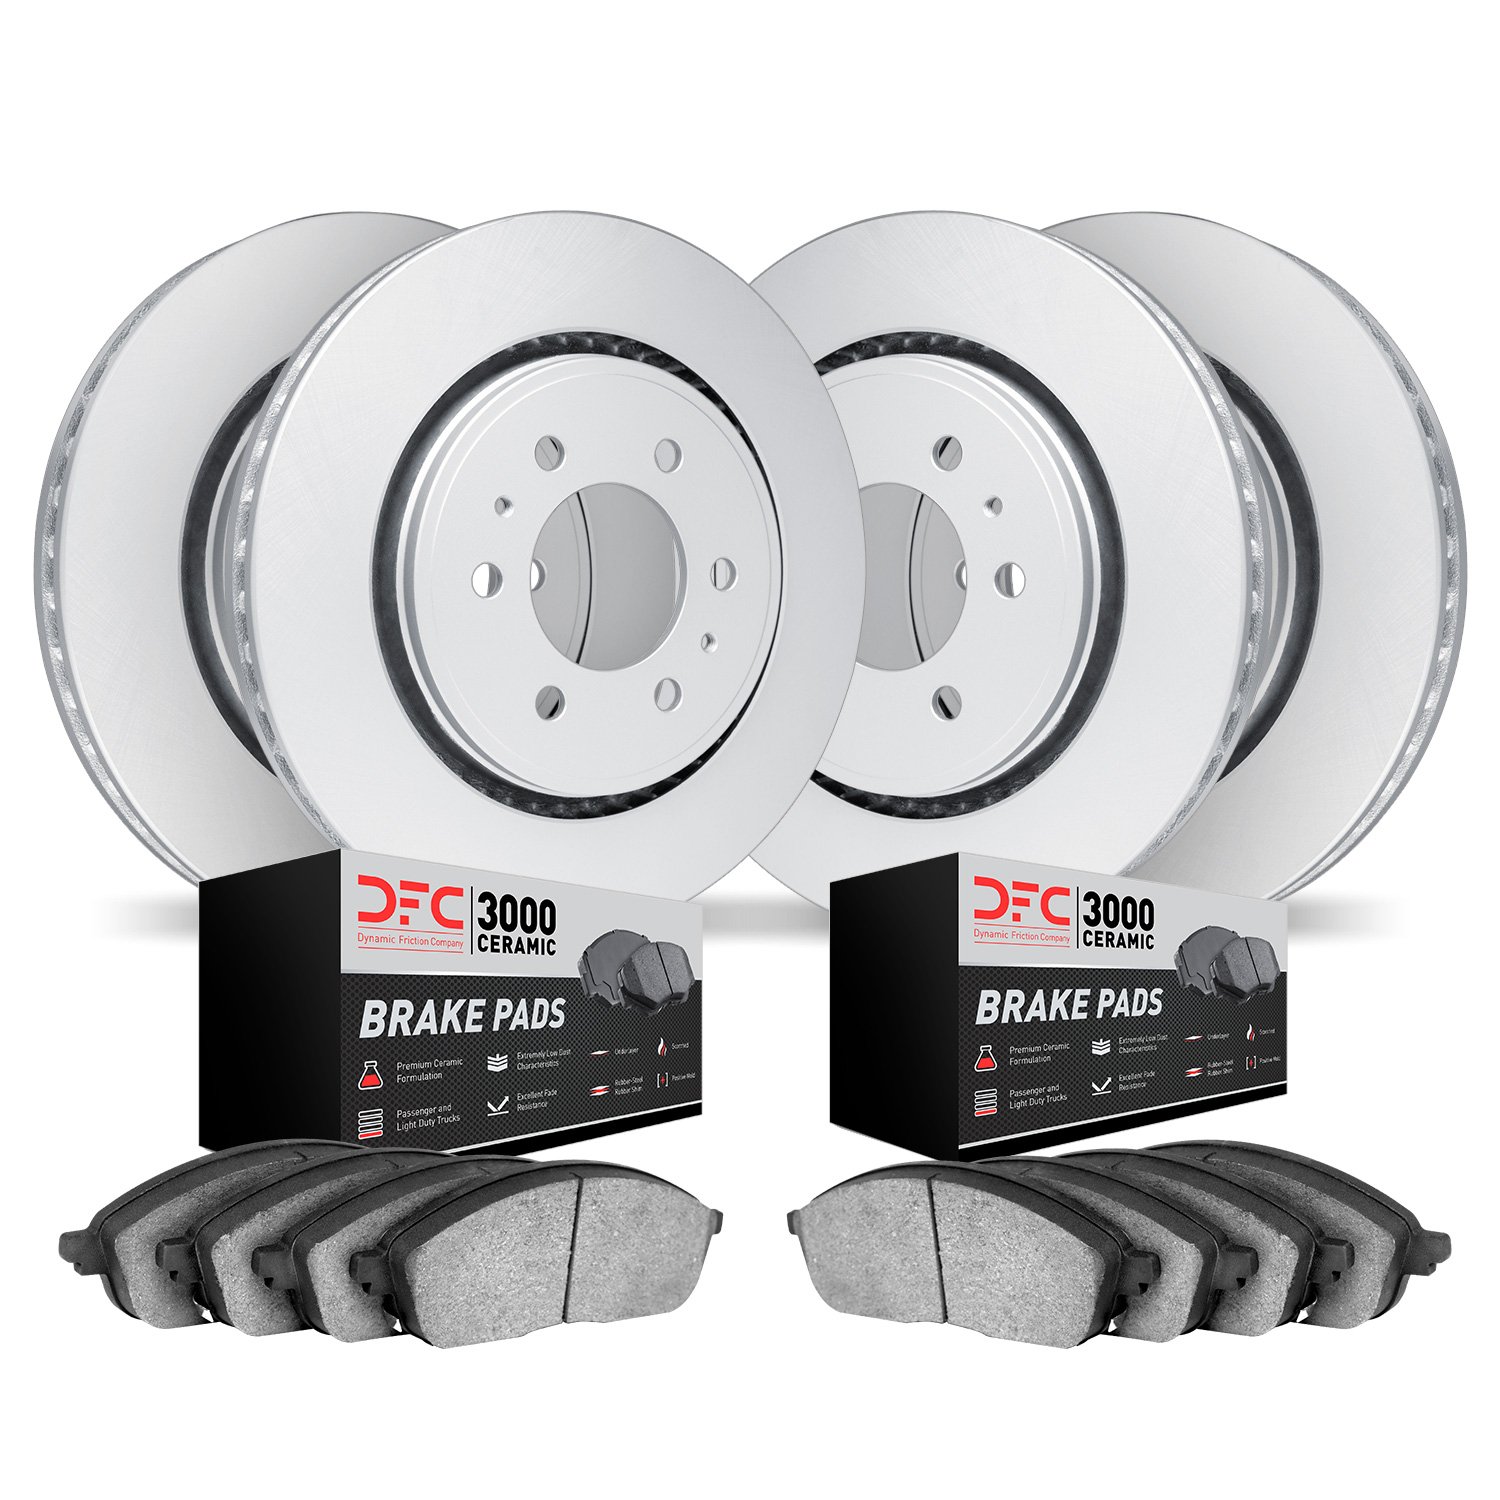 4304-67042 Geospec Brake Rotors with 3000-Series Ceramic Brake Pads Kit, Fits Select Infiniti/Nissan, Position: Front and Rear